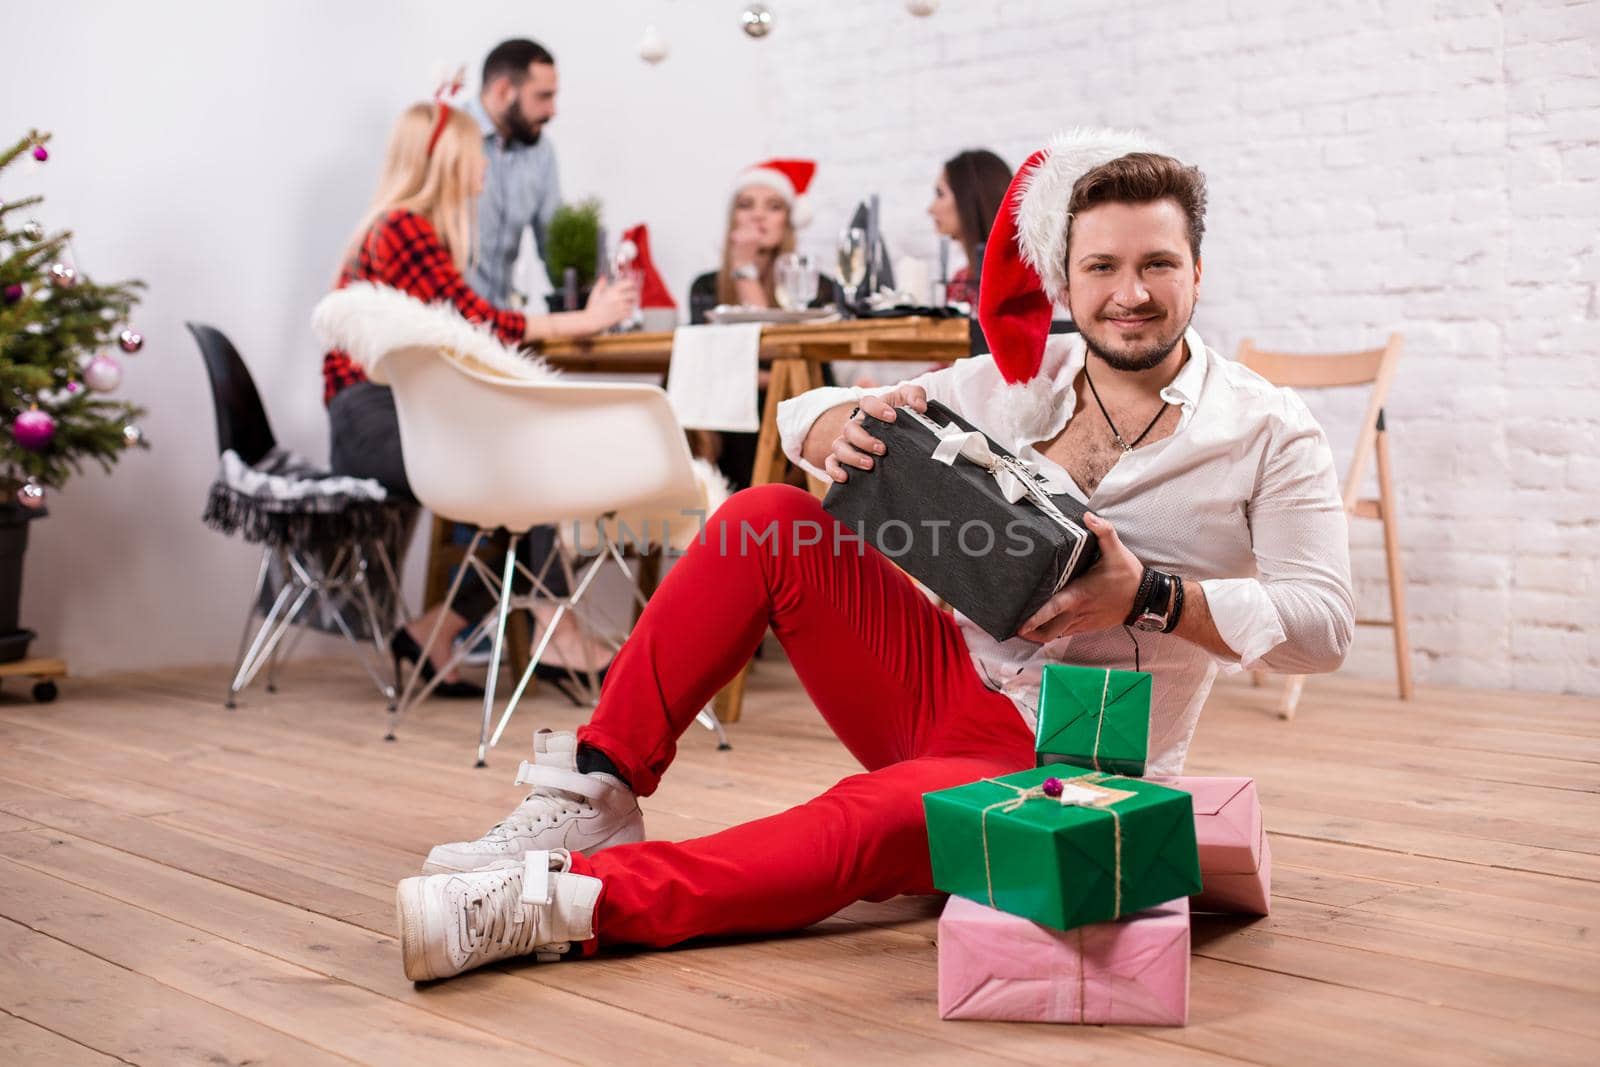 Shot of happy friends enjoying holidays. Focus on the man with a gift boxes in the foreground in a red Christmas hat by nazarovsergey